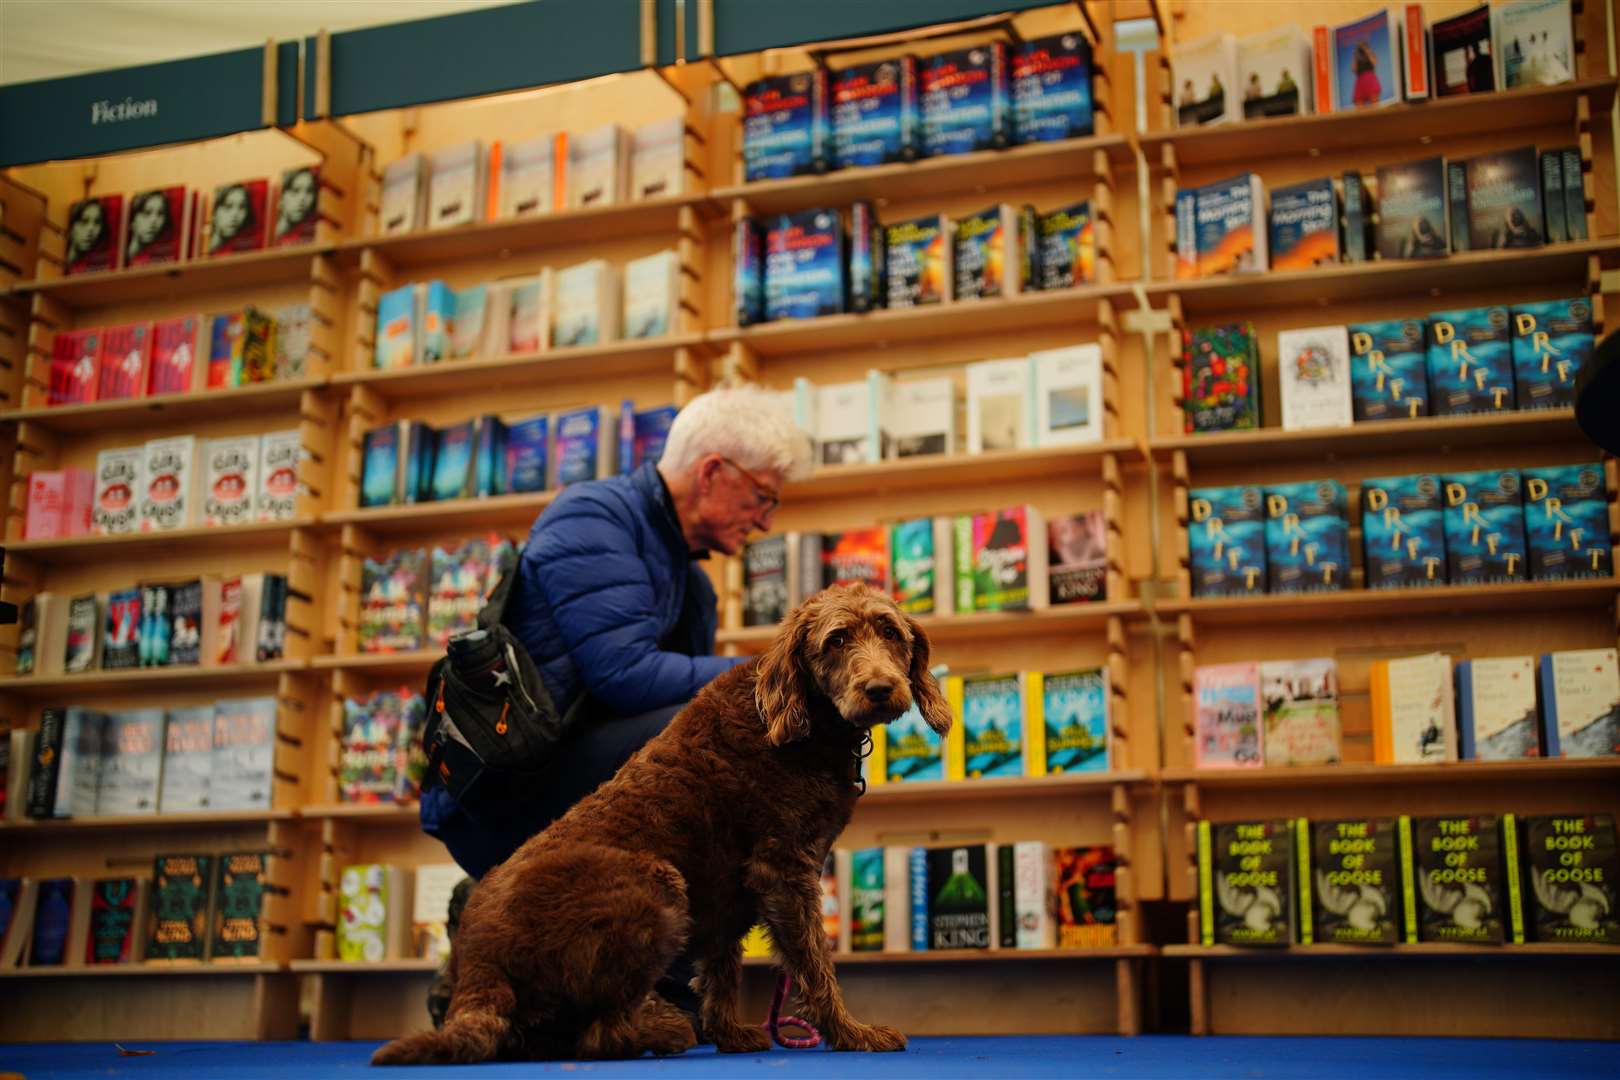 A man peruses a book with his dog at the Cheltenham Literature Festival 2022 (Ben Birchall/PA)